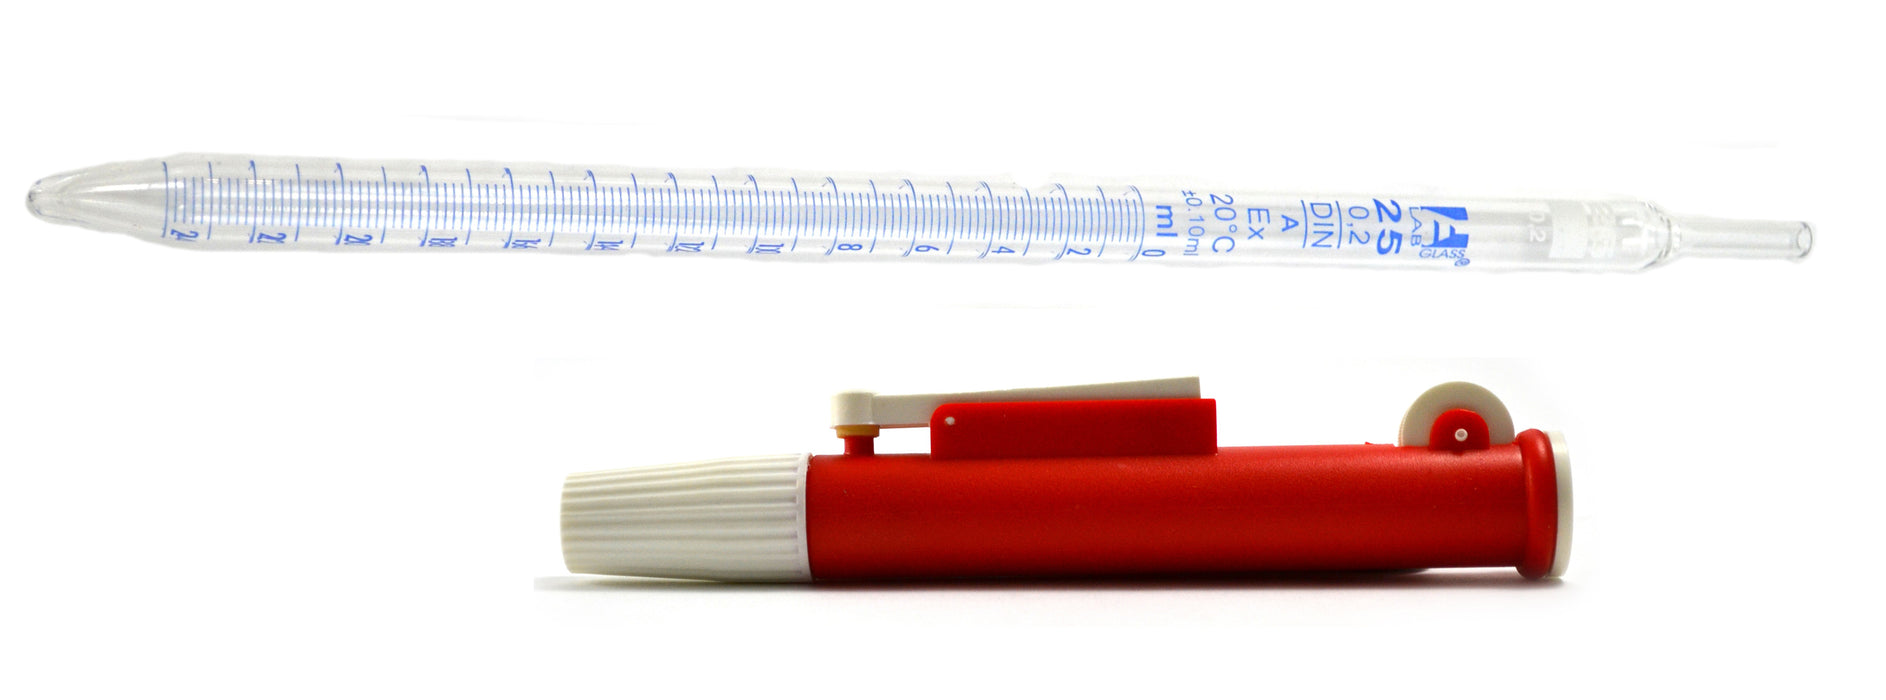 25.0ml Serological Pipette with Red 25.0ml Pipette Pump